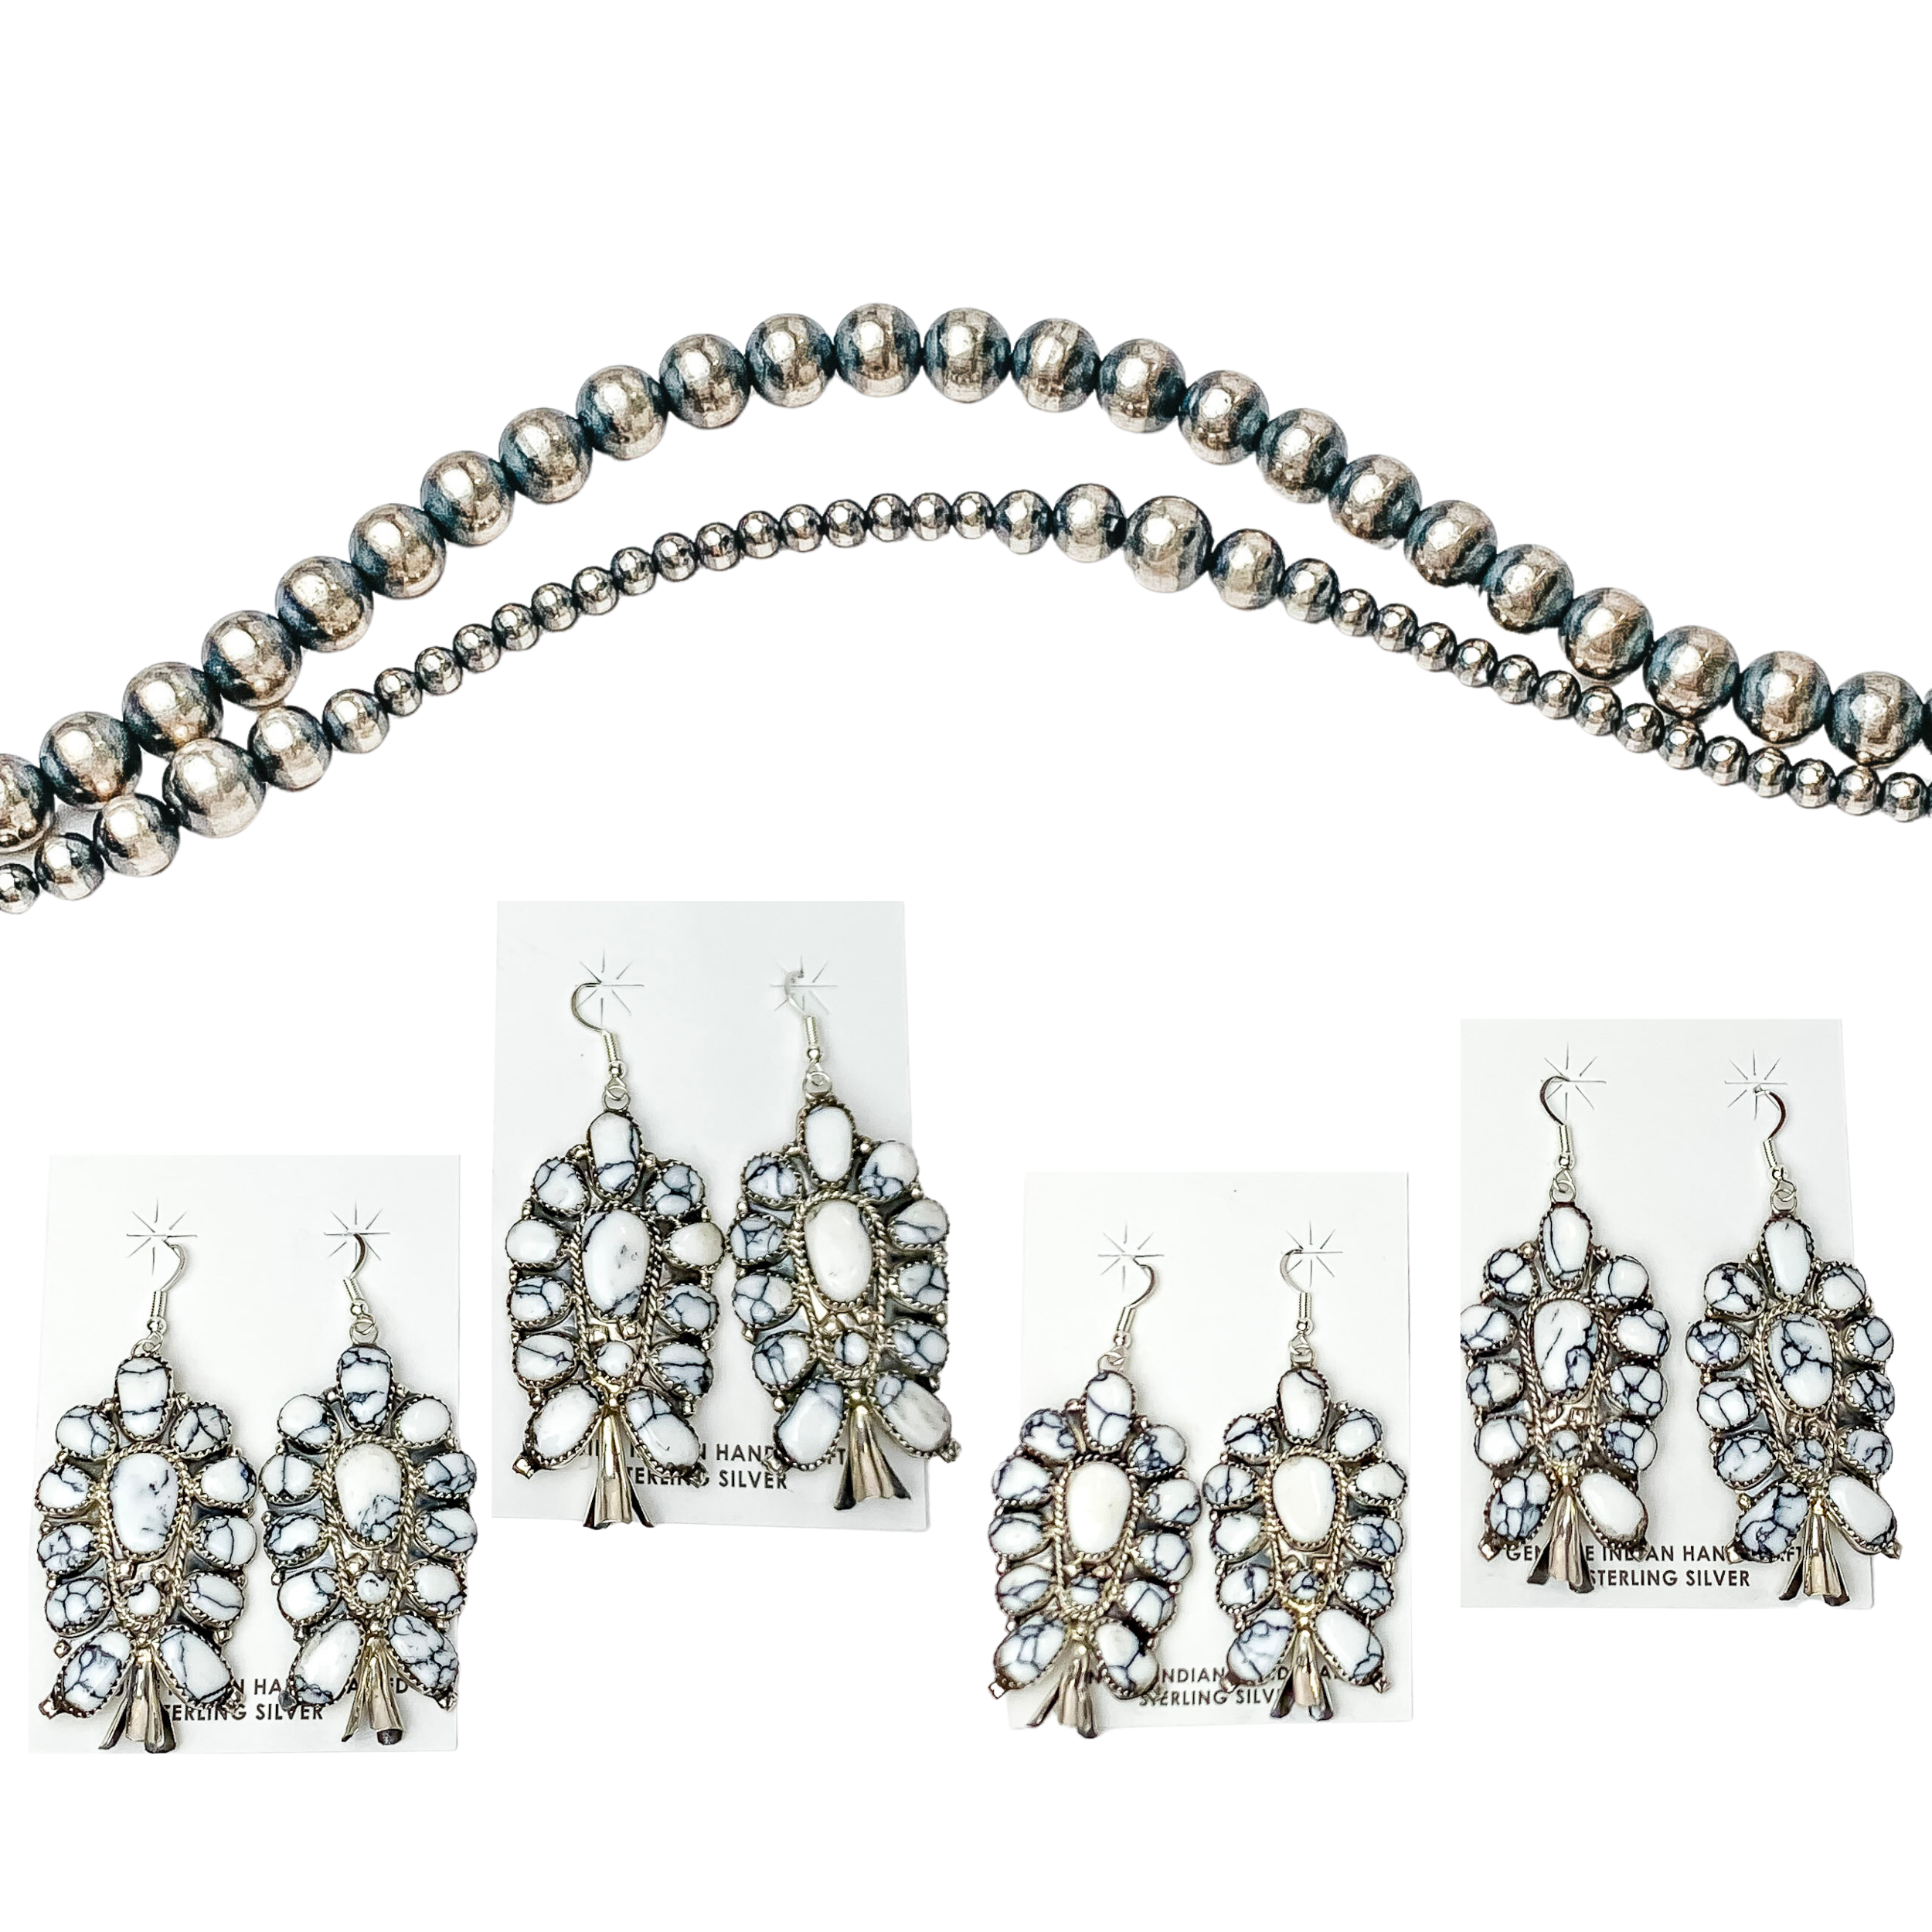 Centered in the picture is 4 sets of white buffalo cluster squash blossom earrings. Navajo pearls are laid above the earrings, all on a white background. 